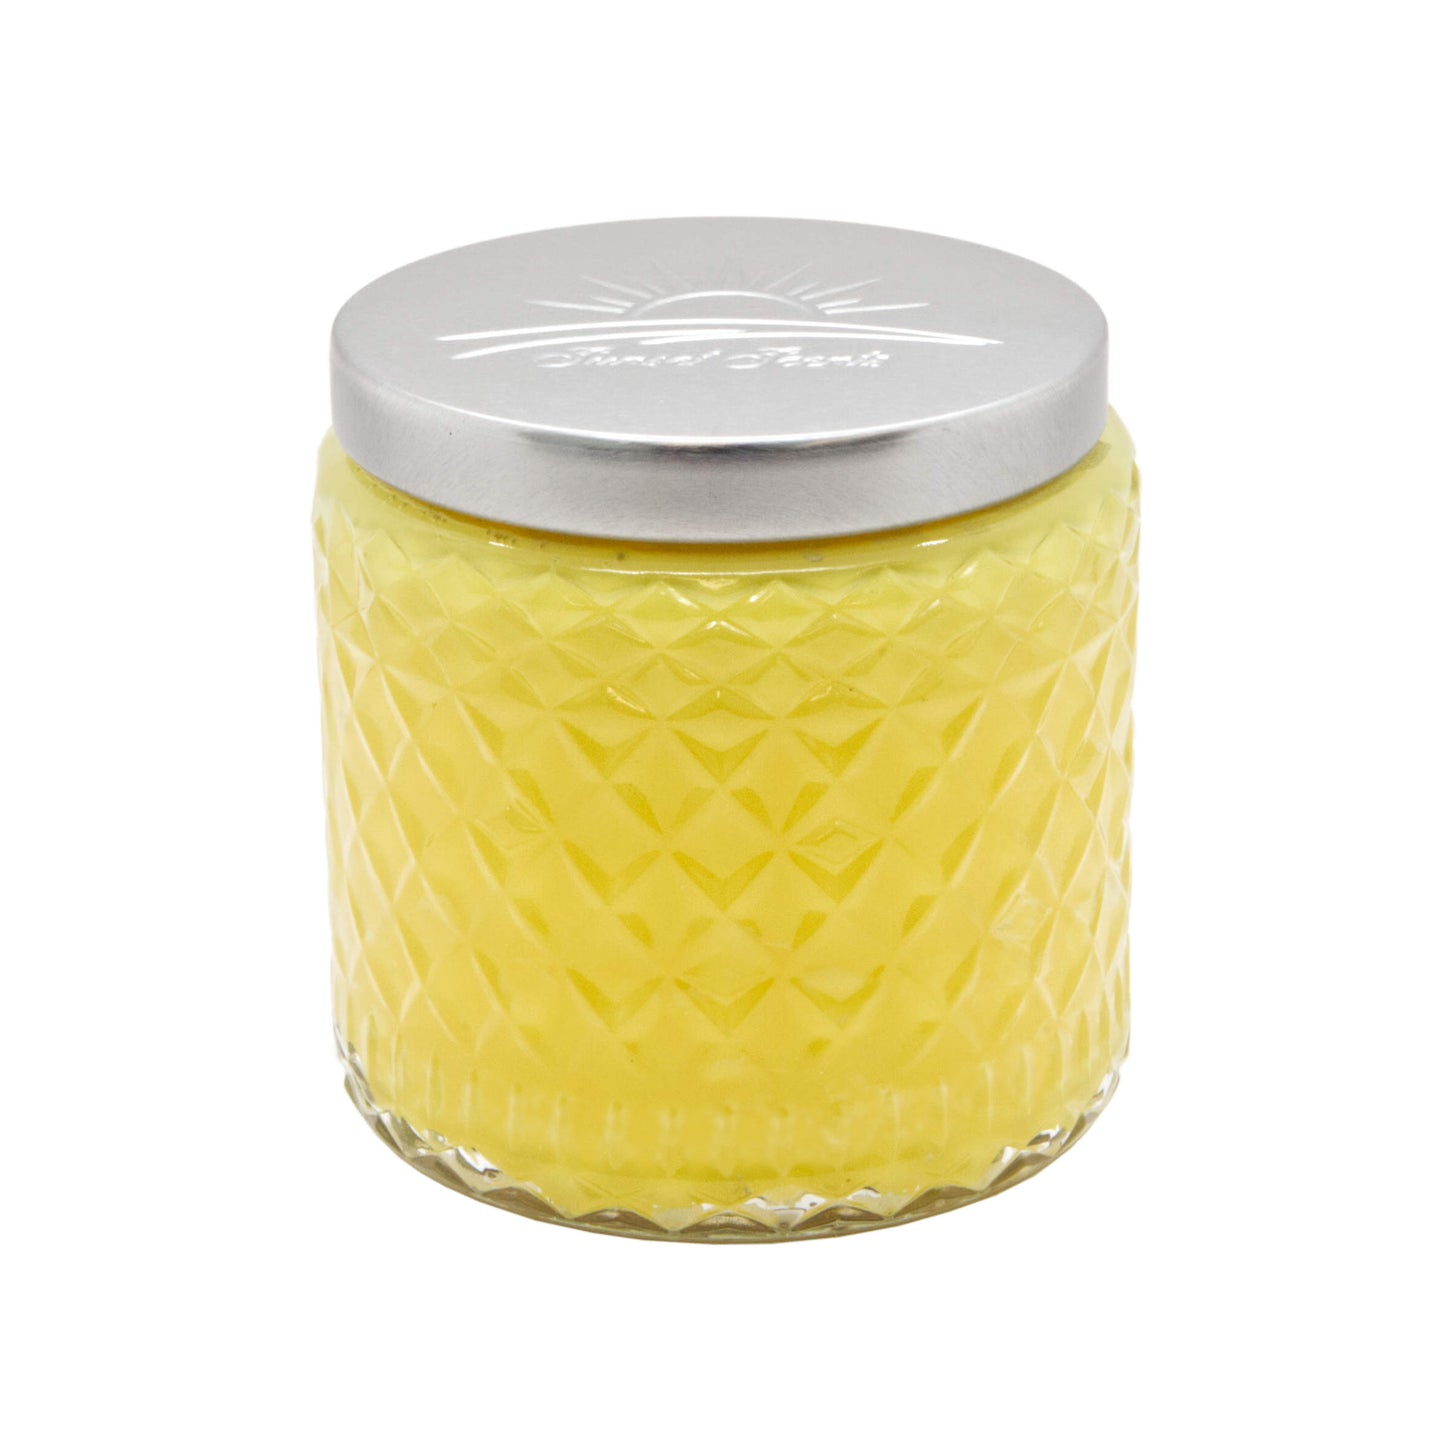 Pineapple Coast Scented Candle